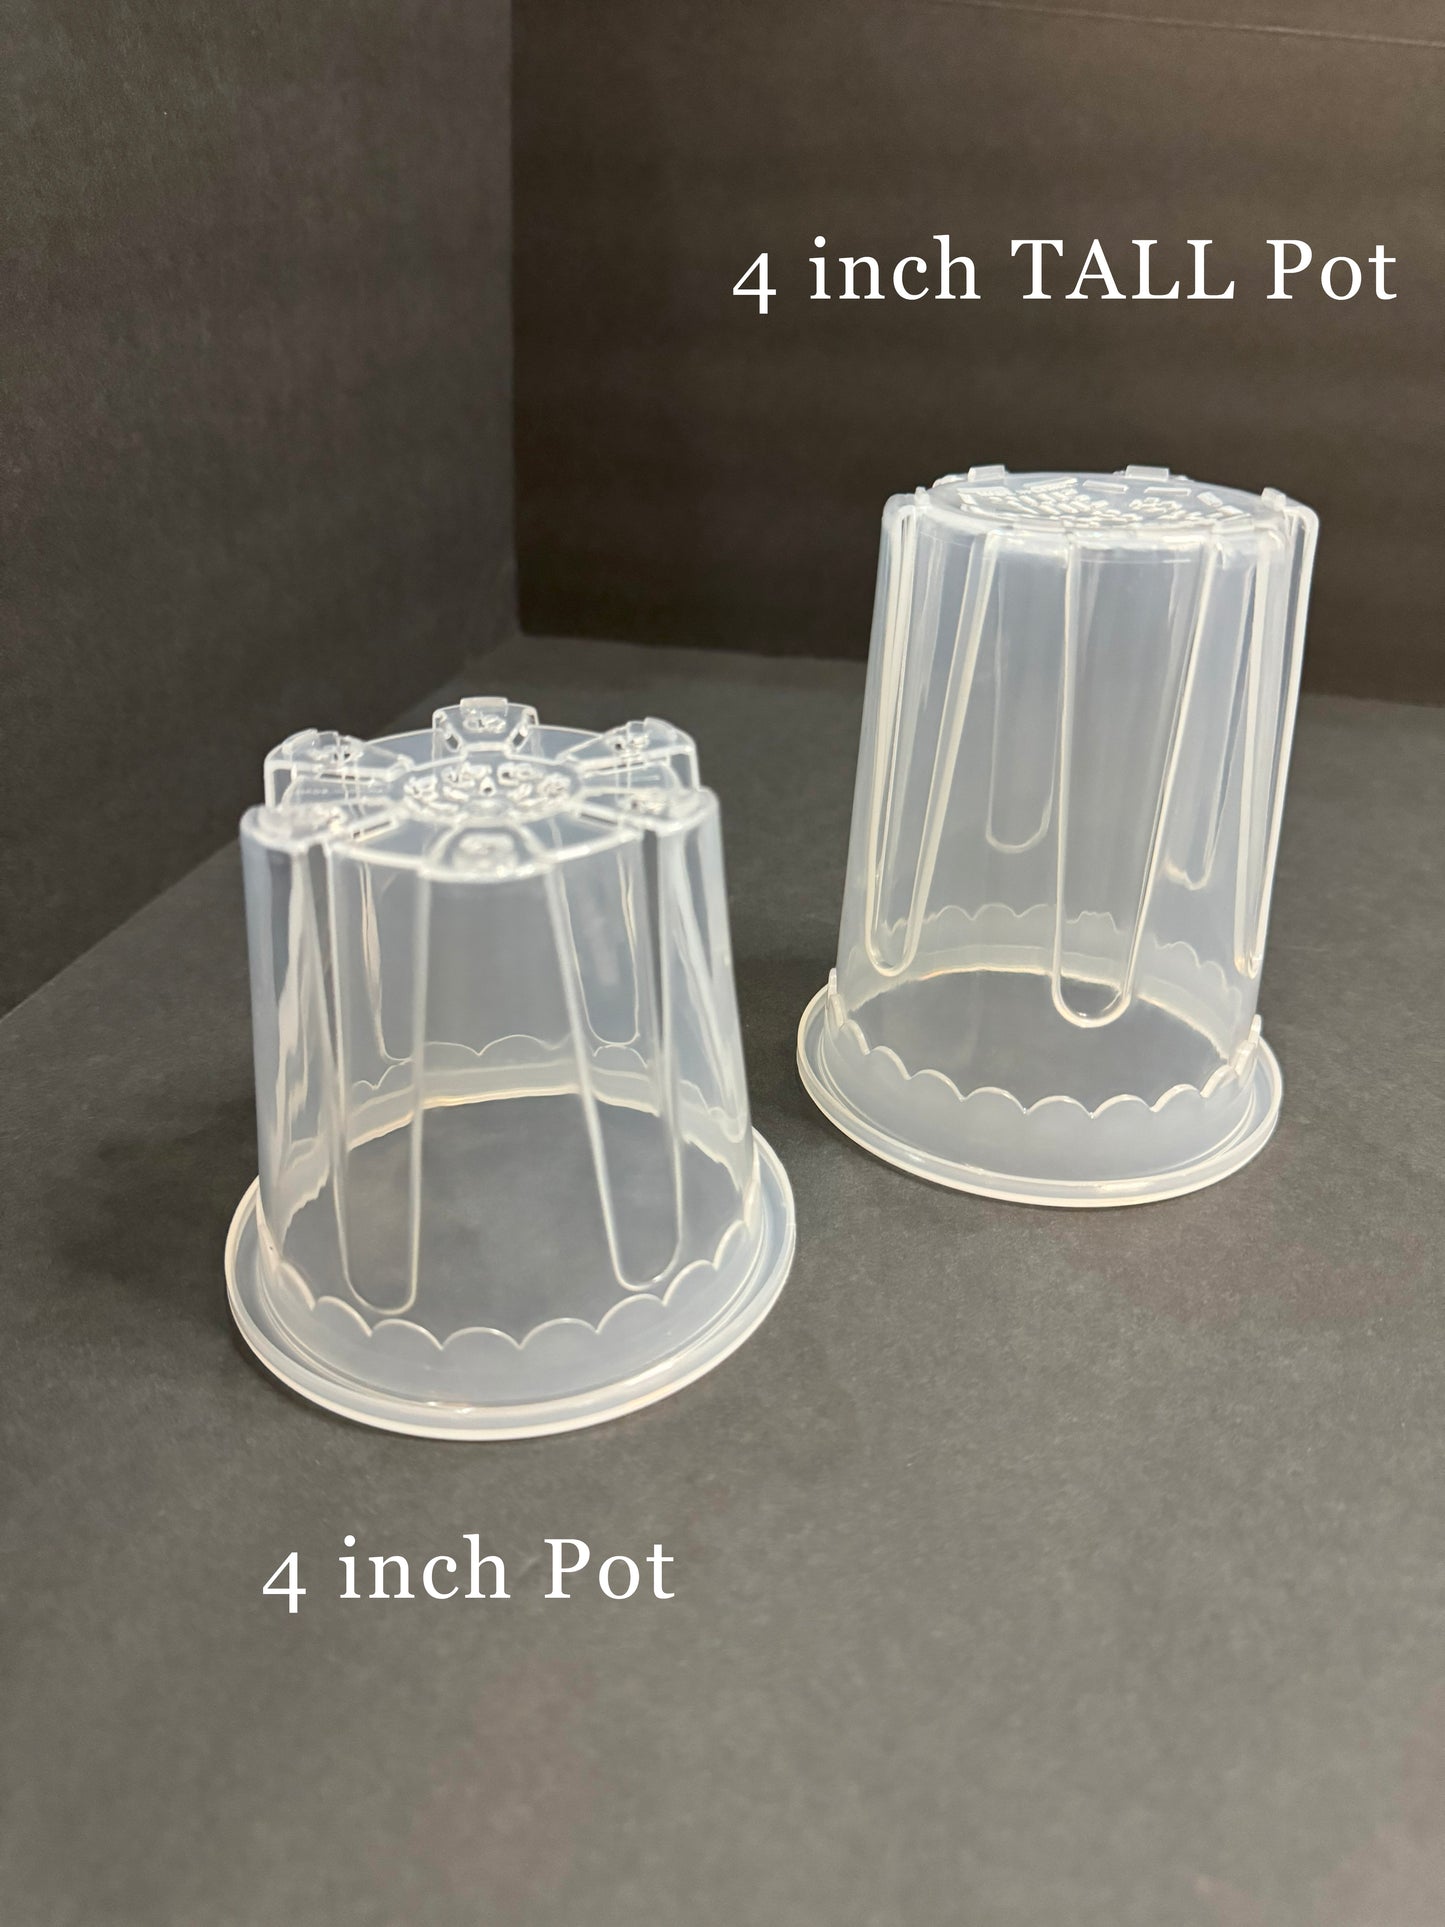 4 Inch Heavy Duty Round Clear Pot | Extra Firm Clear Round Small Pot | Extra Sturdy Clear TALL Pot